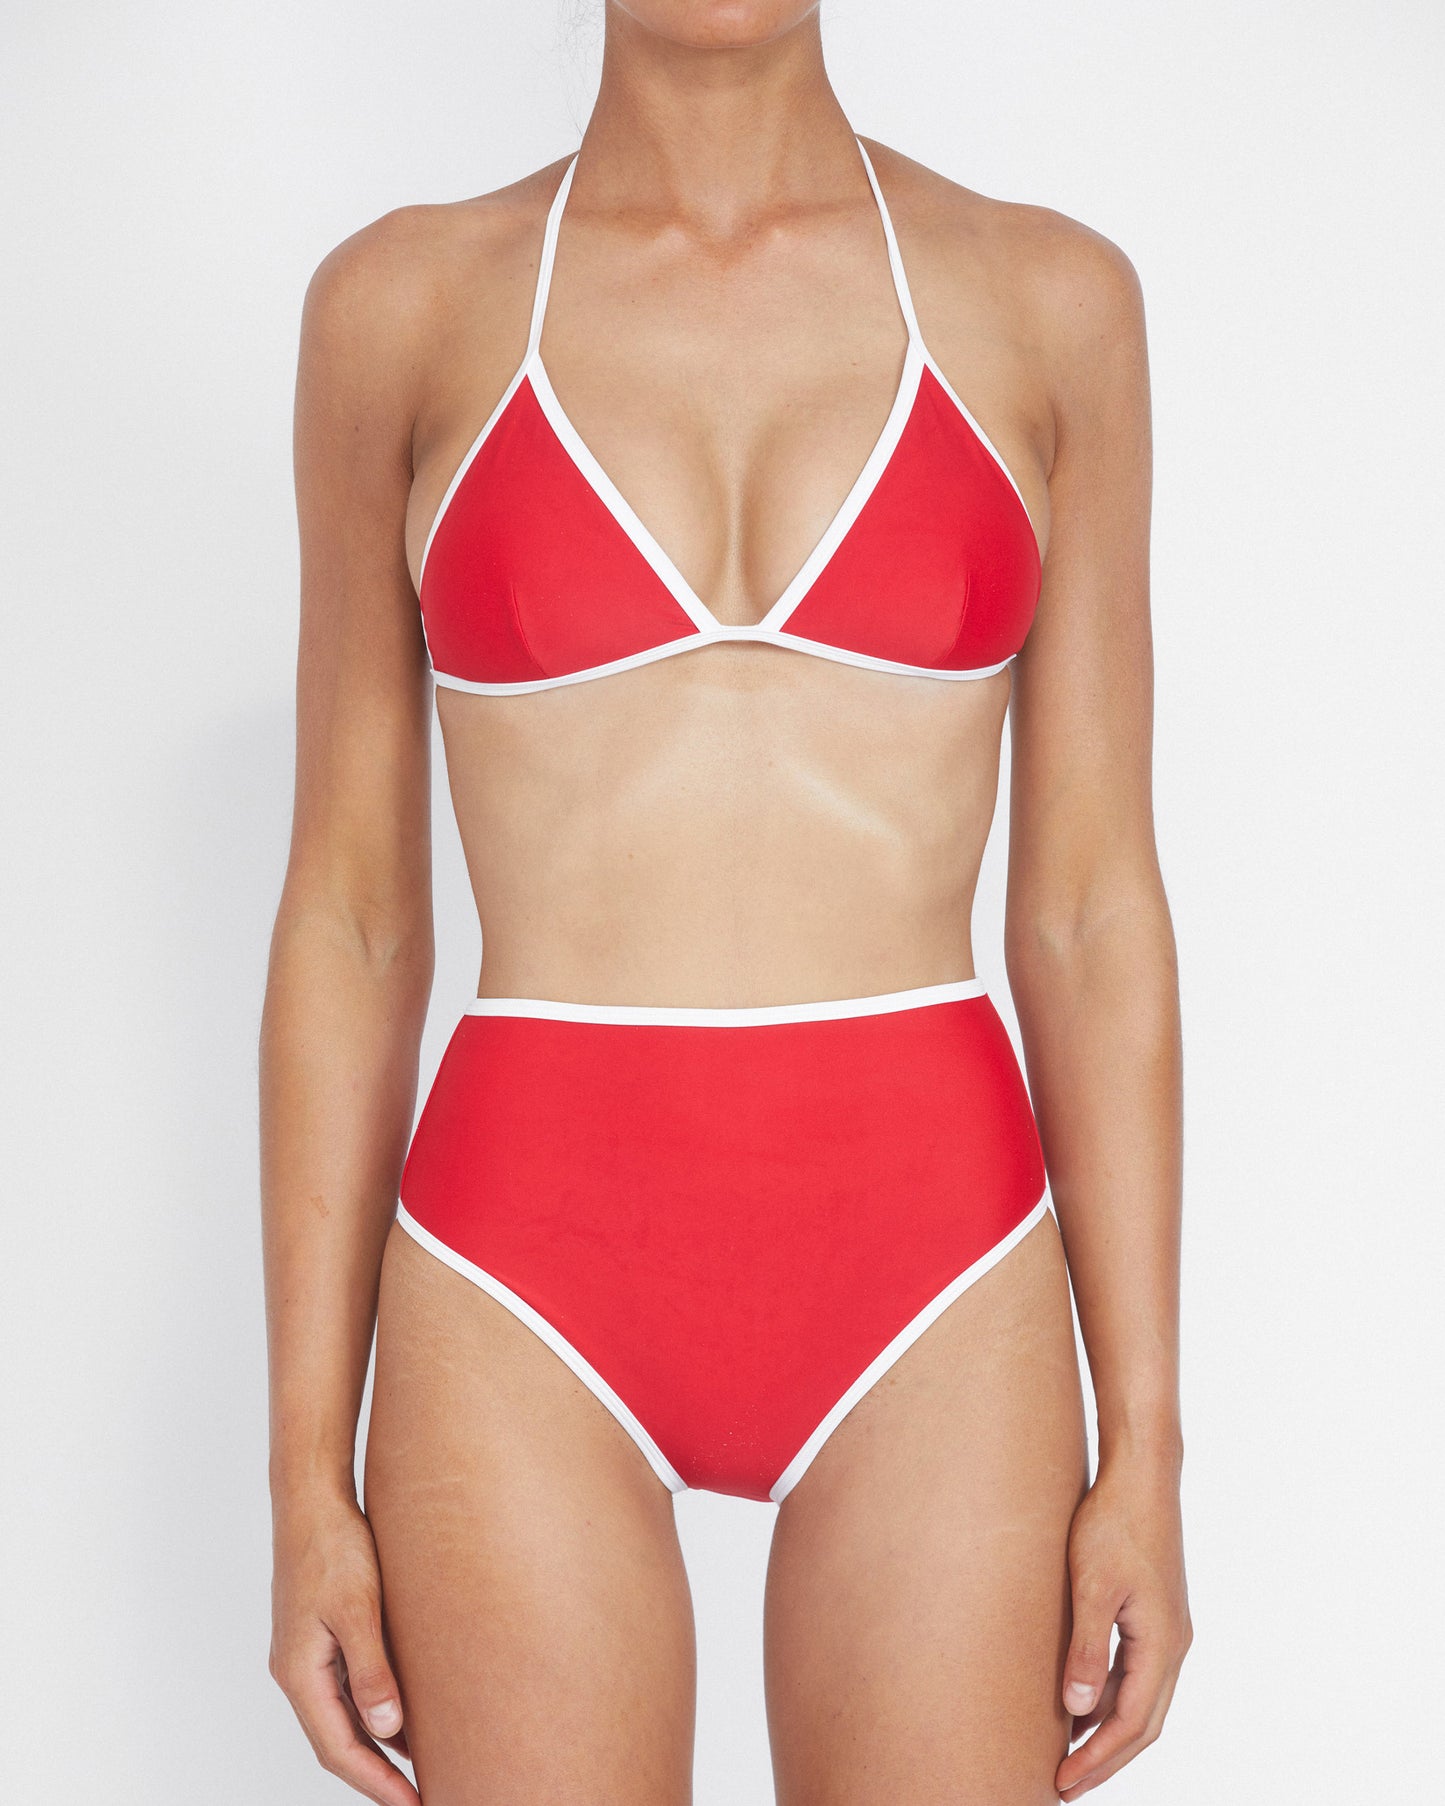 It's Now Cool Zwemkleding - Duo Tri Top - Rood & Wit Contrast